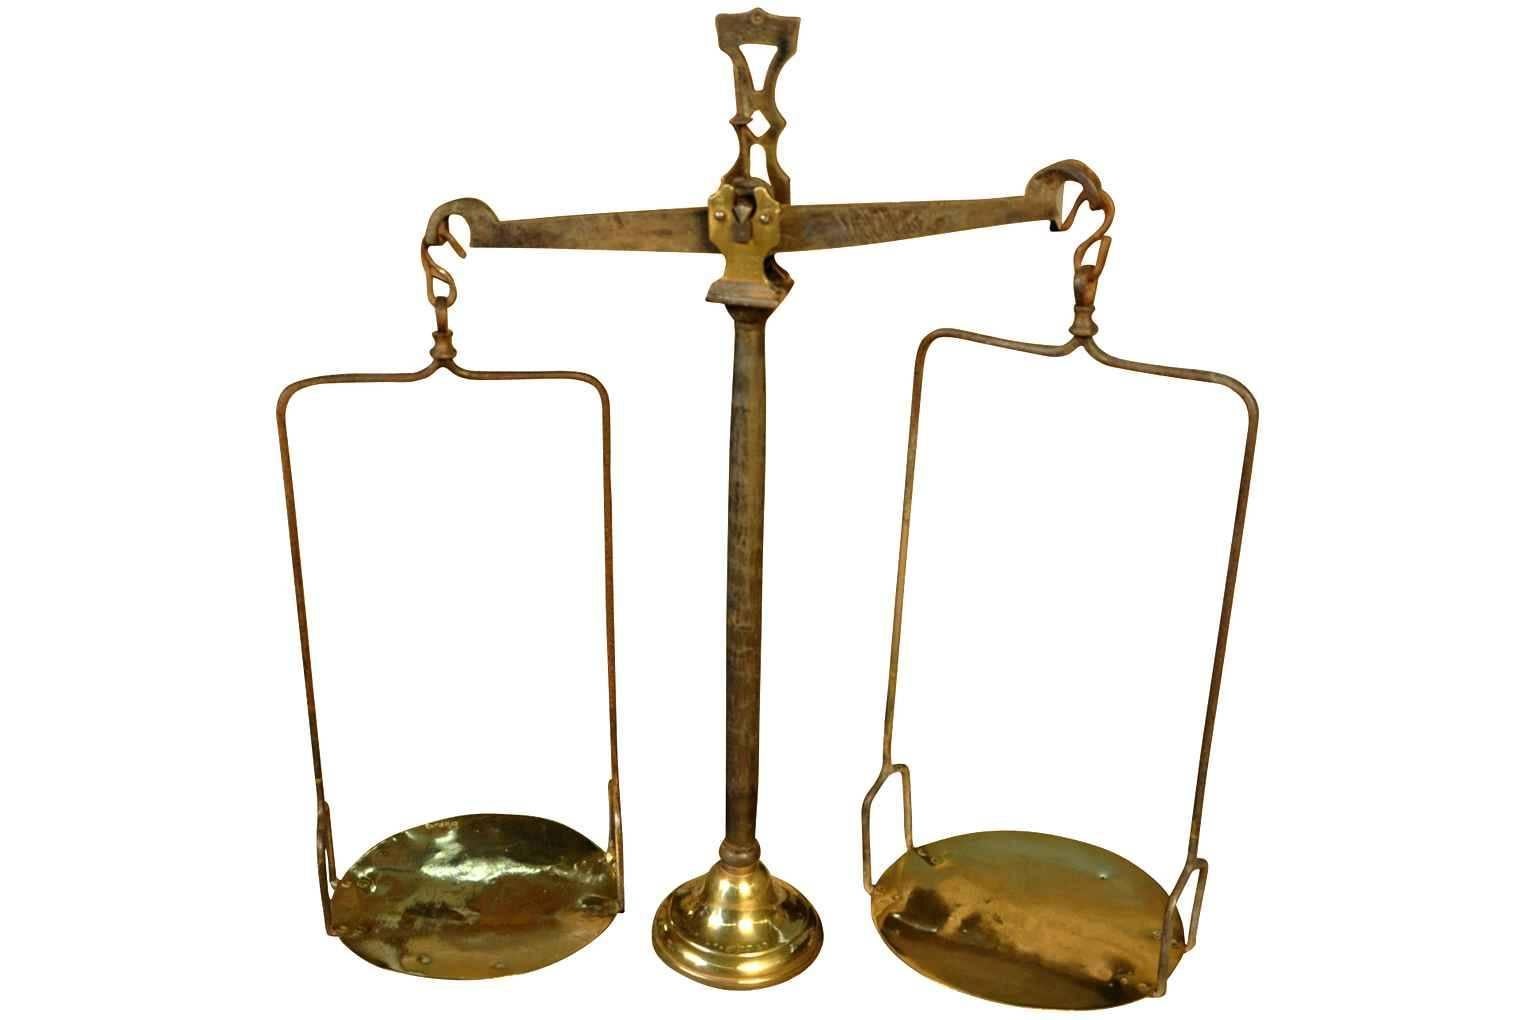 A handsome French 18th century balance scale in iron and brass. The balance mechanism is in iron. The foot and the plates are in brass. The foot of the shaft and one of the plates display the maker's hallmarks. The scale is a lovely decorative piece